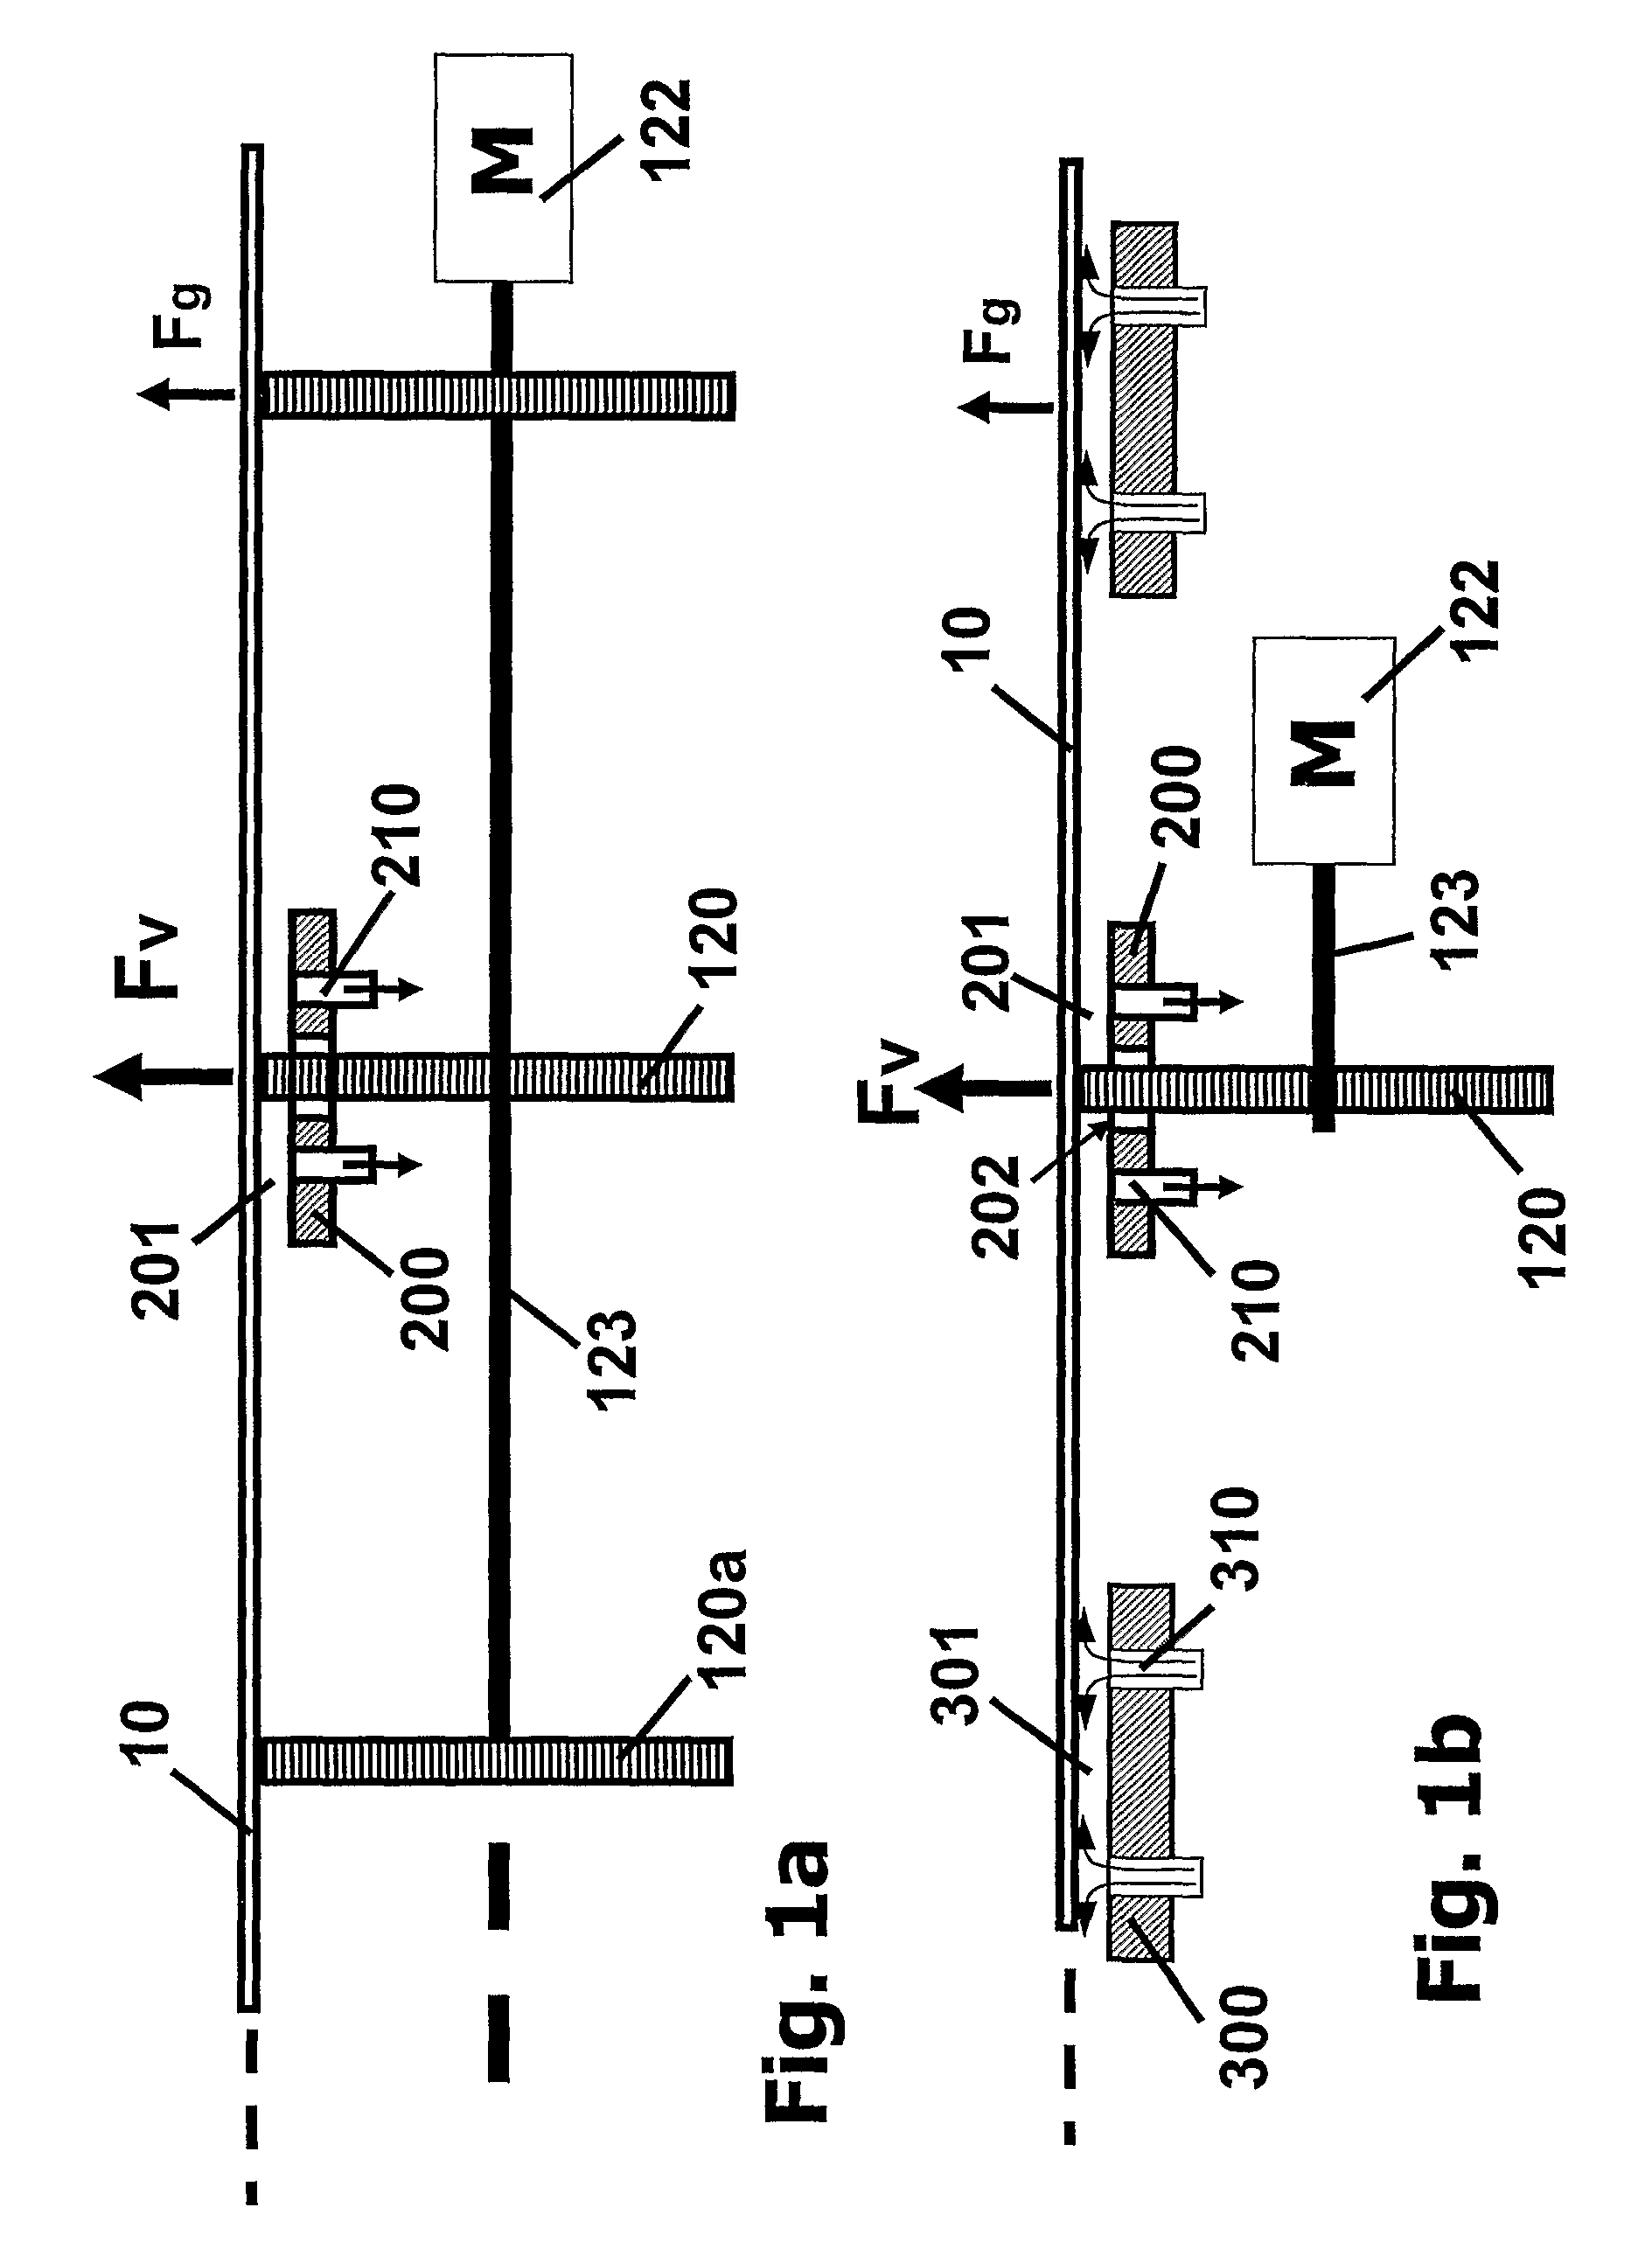 System and method for enhancing conveying performance of conveyors